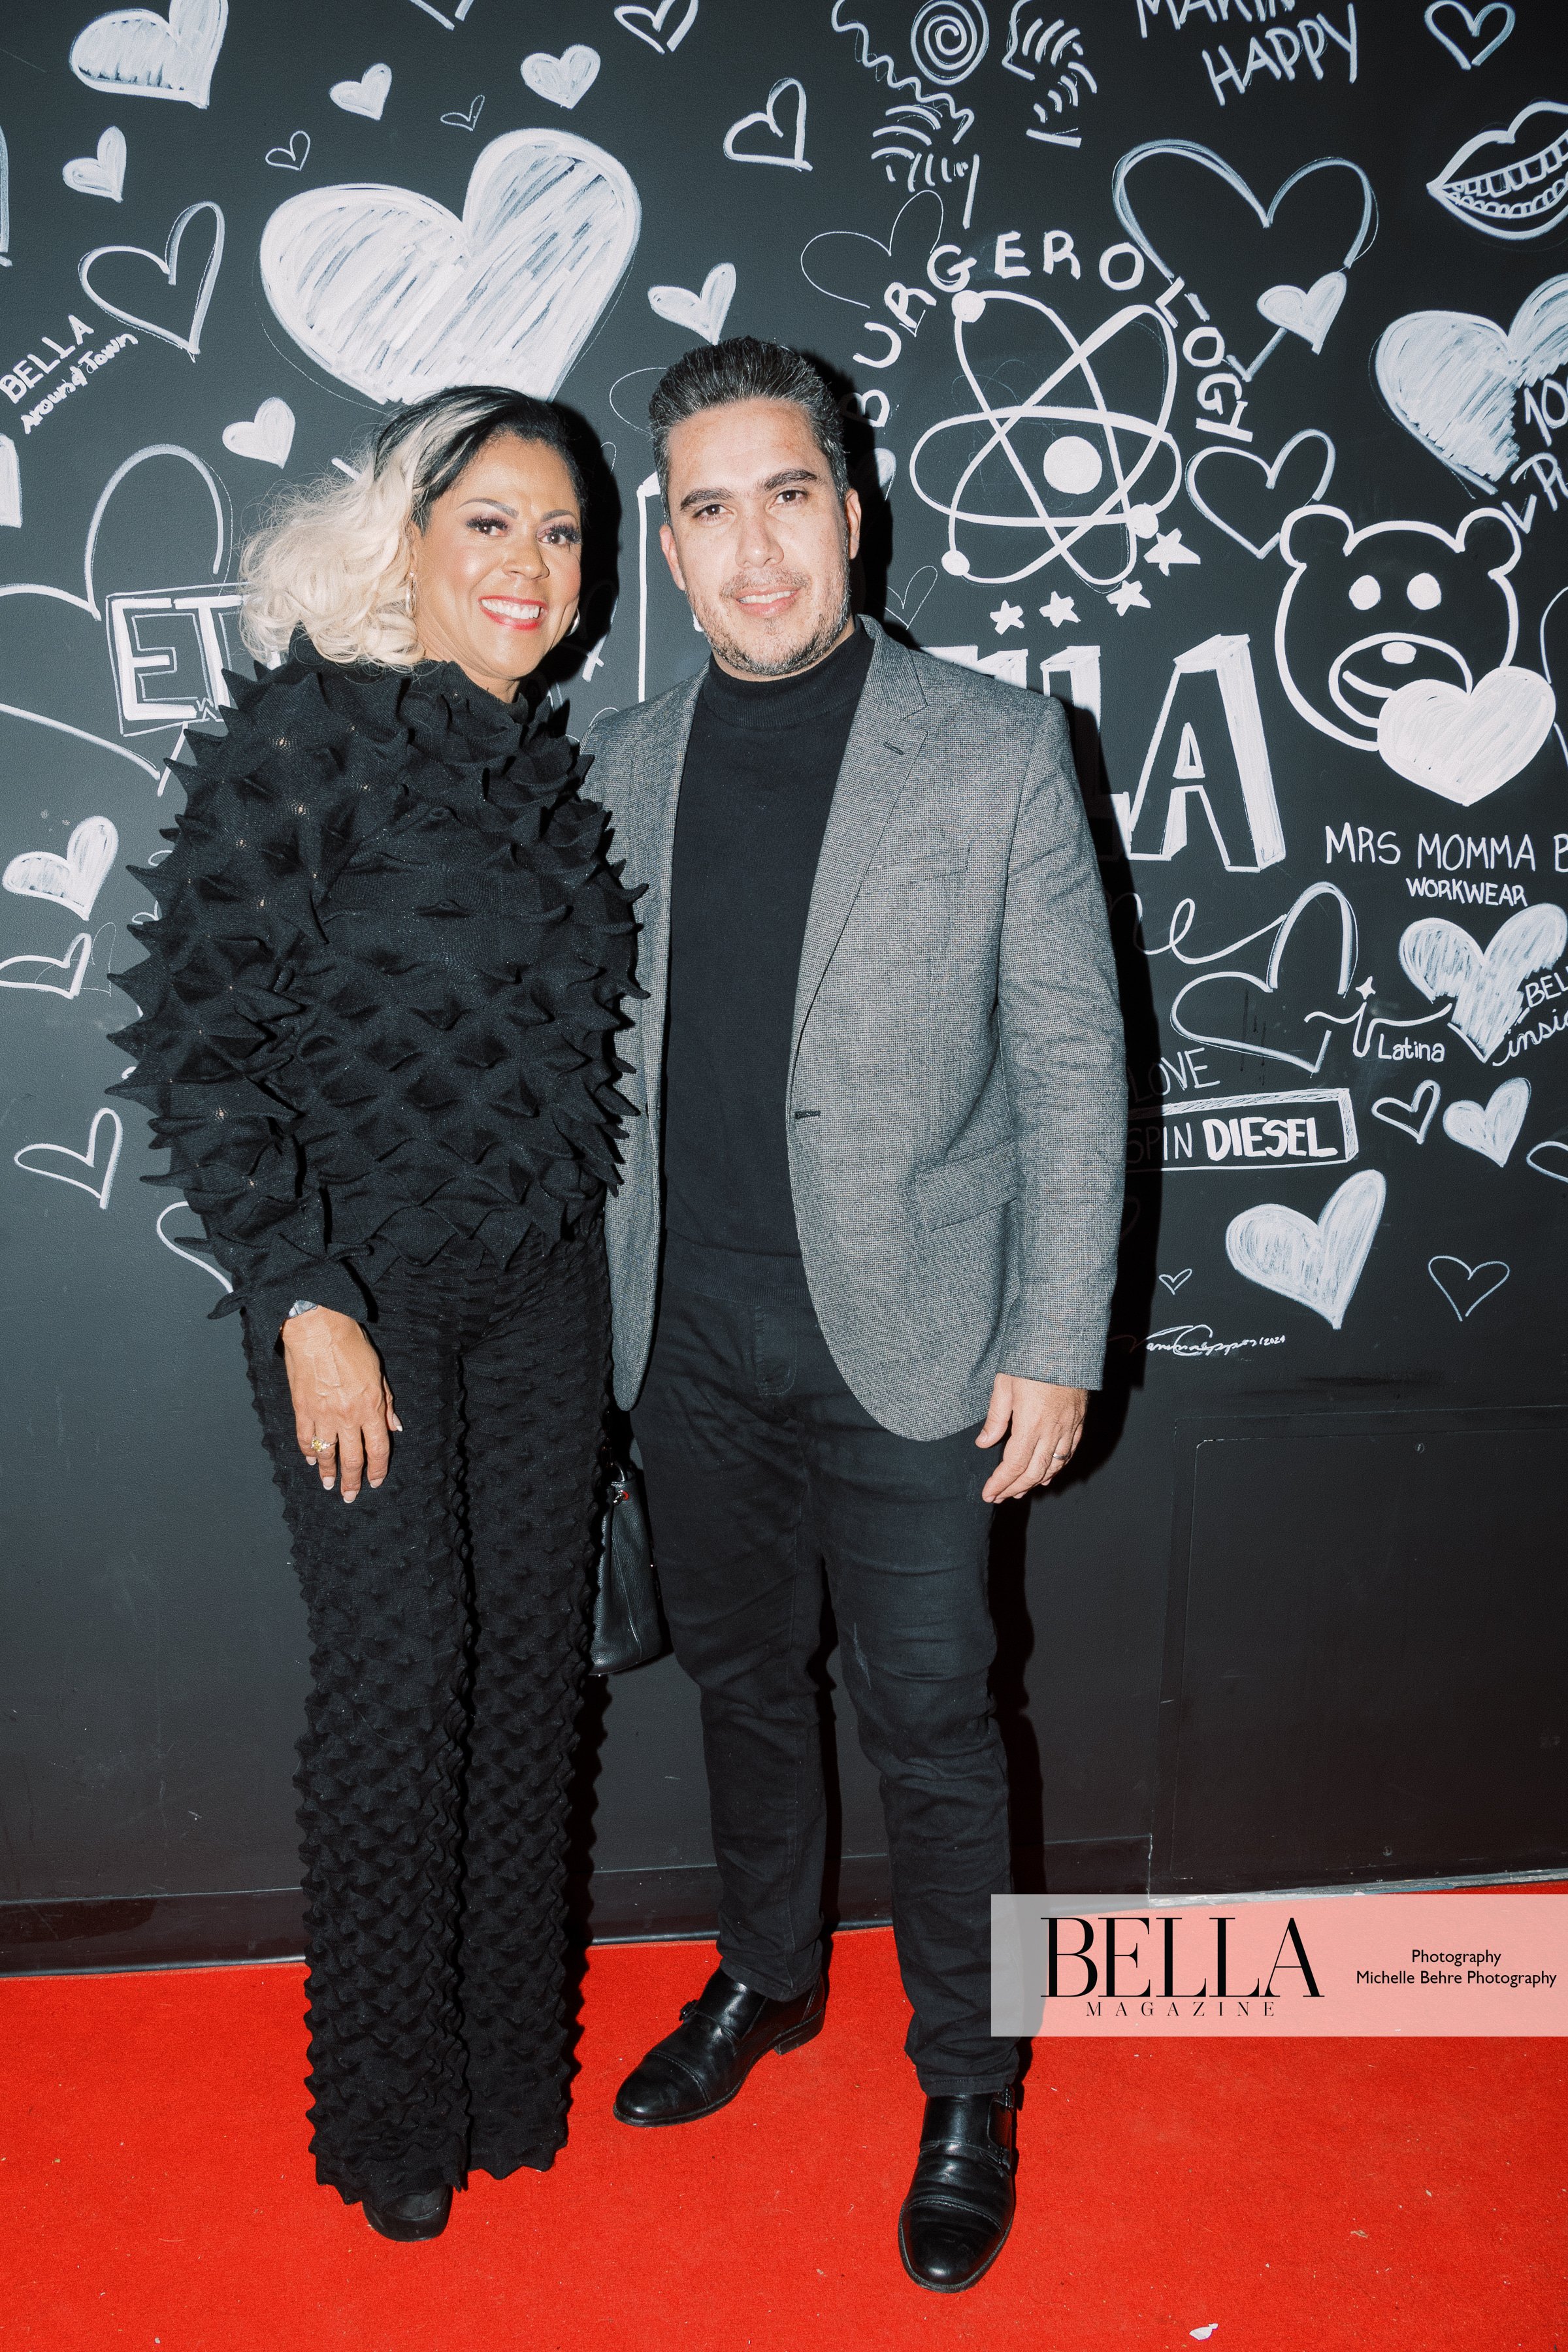 Michelle-Behre-Creative-Co-BELLA-Magazine-Women-of-Influence-Cover-Party-Burgerology-202.jpg